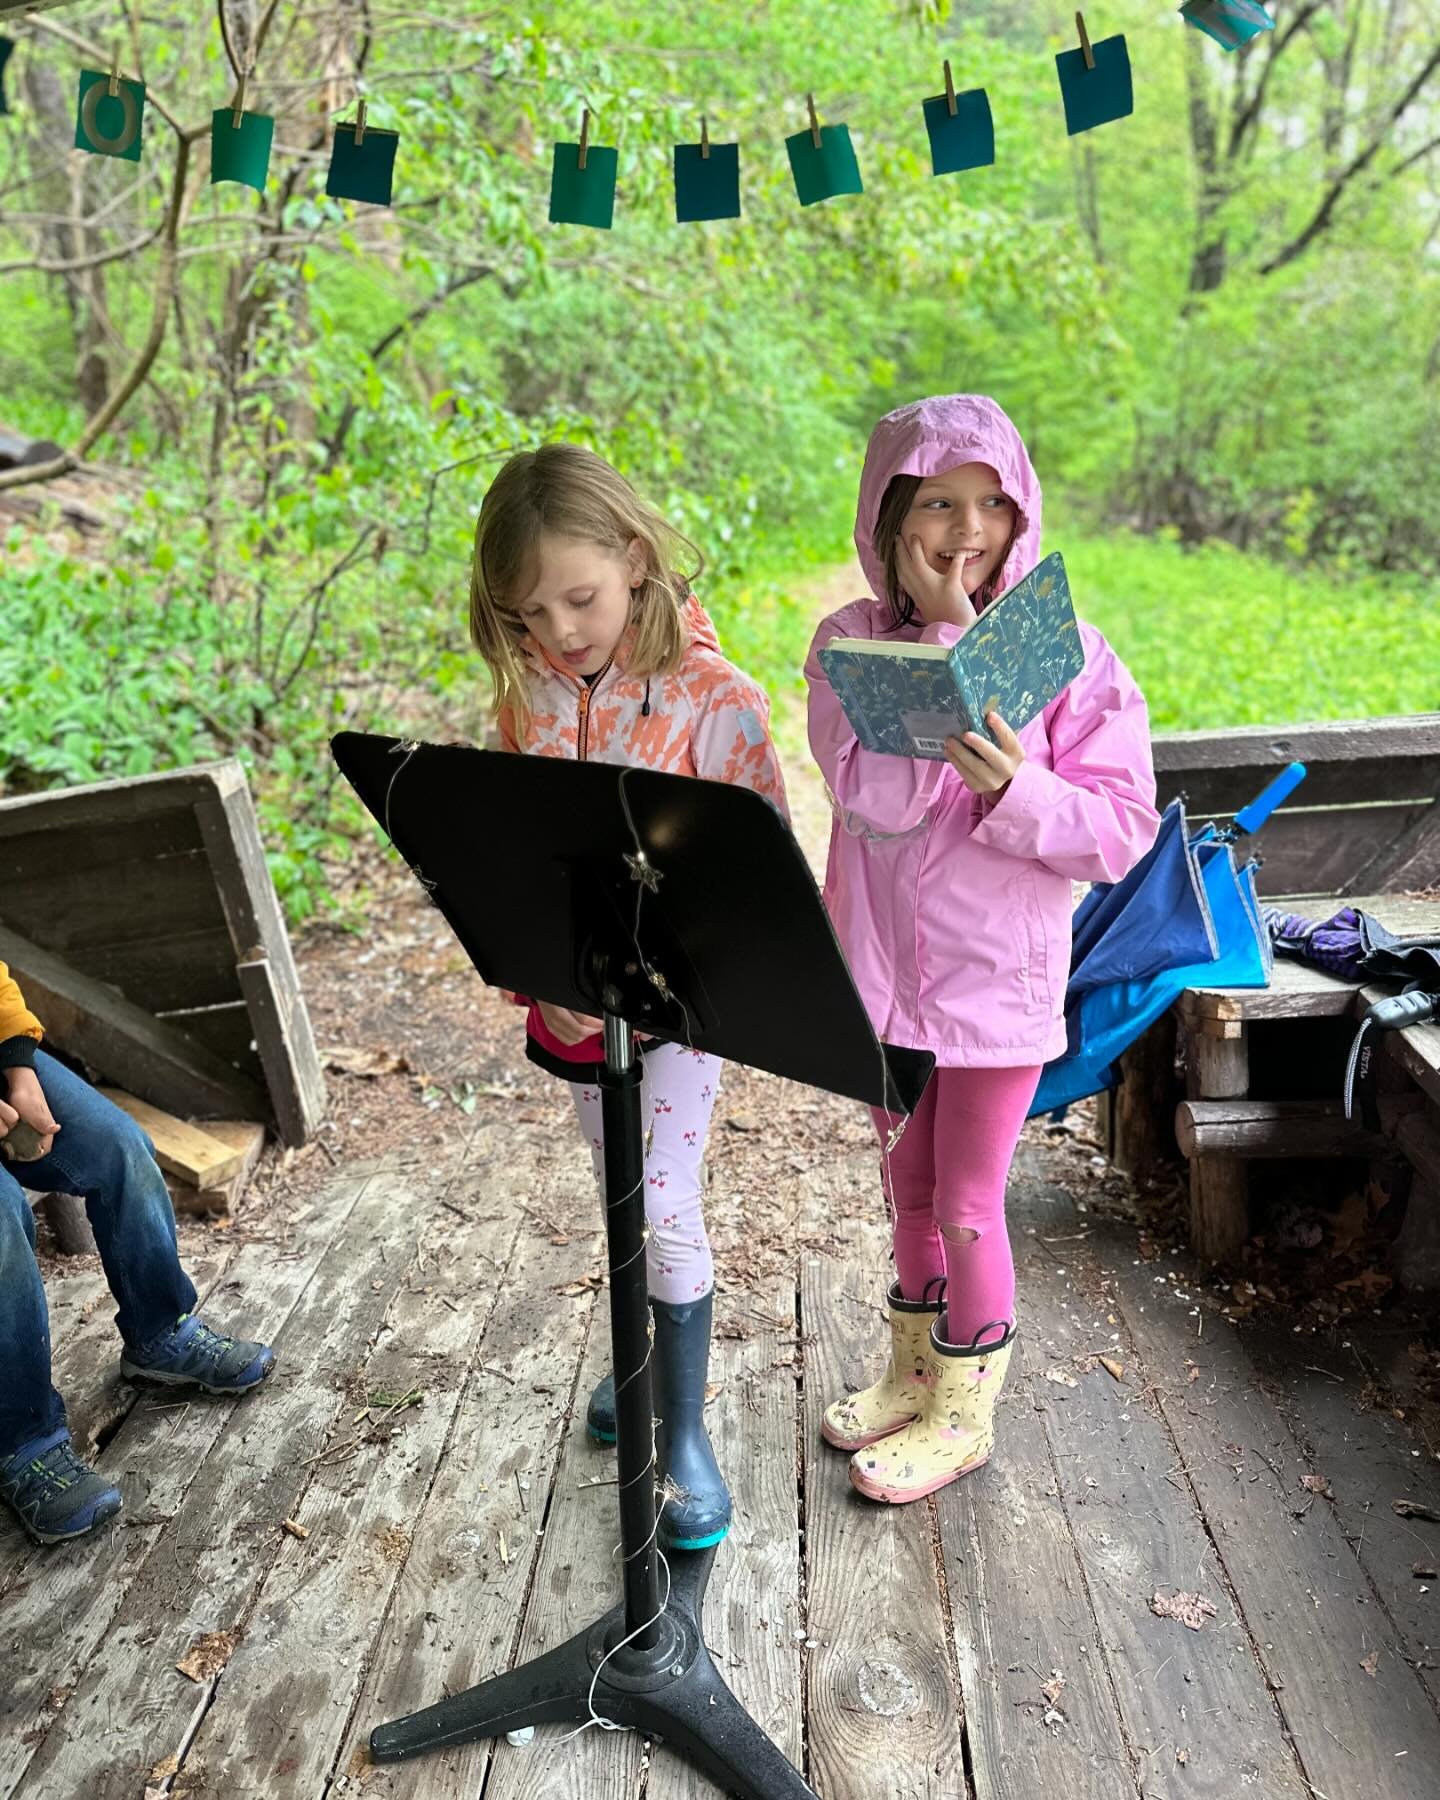 Celebrating our annual Poetry Cafe tradition with our wonderful librarian, Kristin Kane. Even the rain could not stop the joy of sharing our favorite poems. #poetryandkids #commonschool